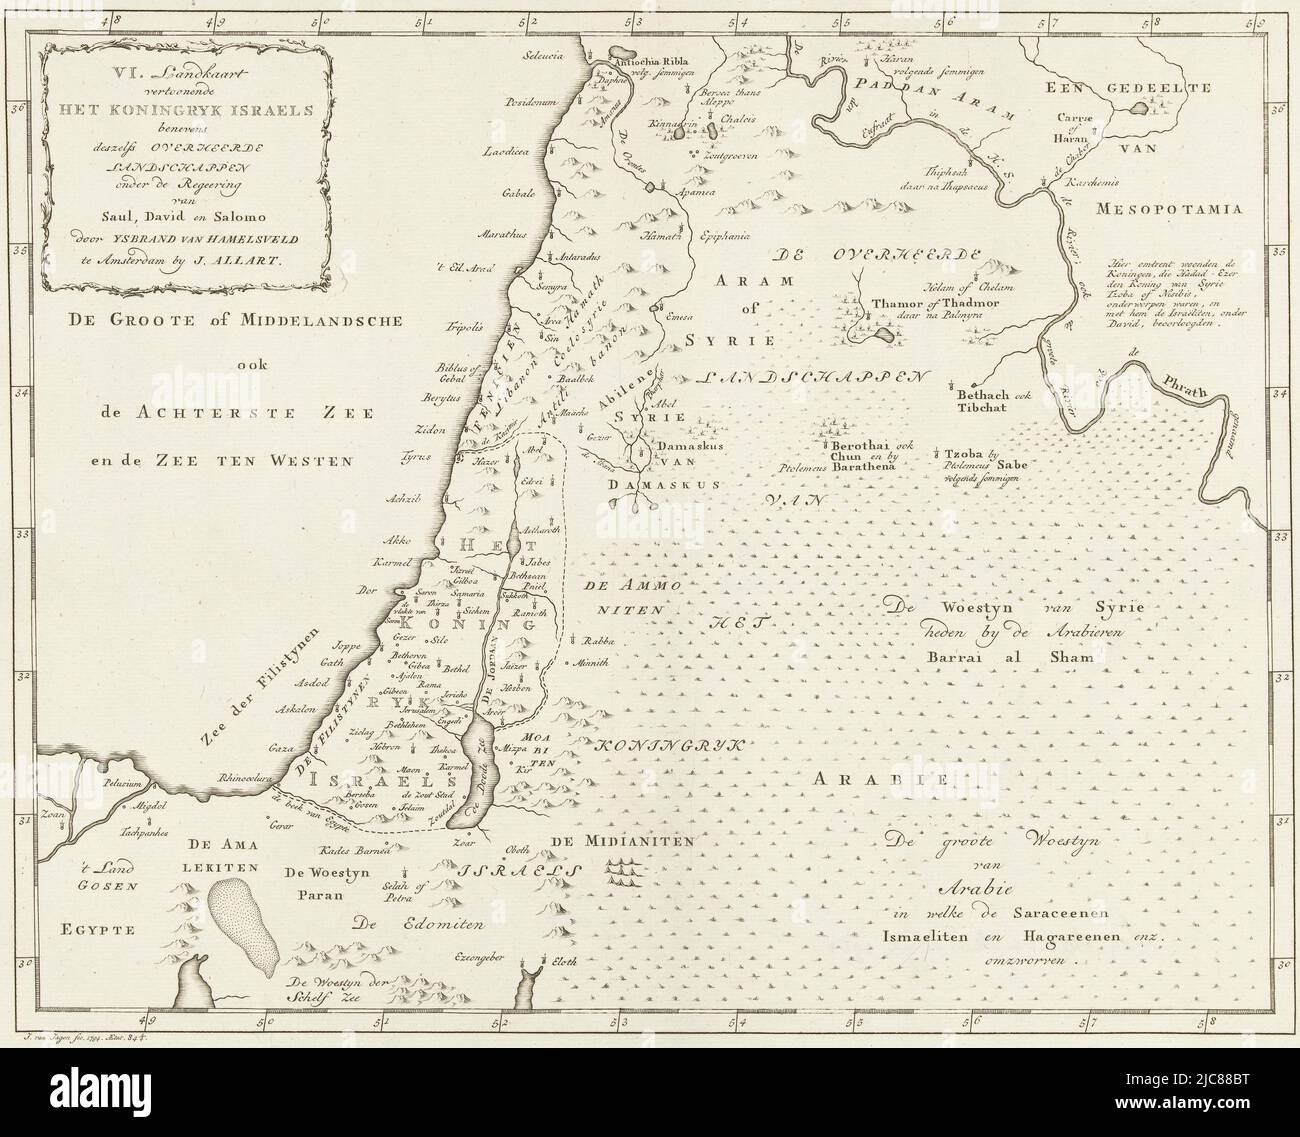 Map of Israel VI. Map showing the kingdom of Israel with its dominions , print maker: Jan van Jagen, (mentioned on object), IJsbrand van Hamelsveld, (mentioned on object), publisher: Johannes Allart, (mentioned on object), Amsterdam, 1794, paper, engraving, etching, h 362 mm × w 443 mm Stock Photo